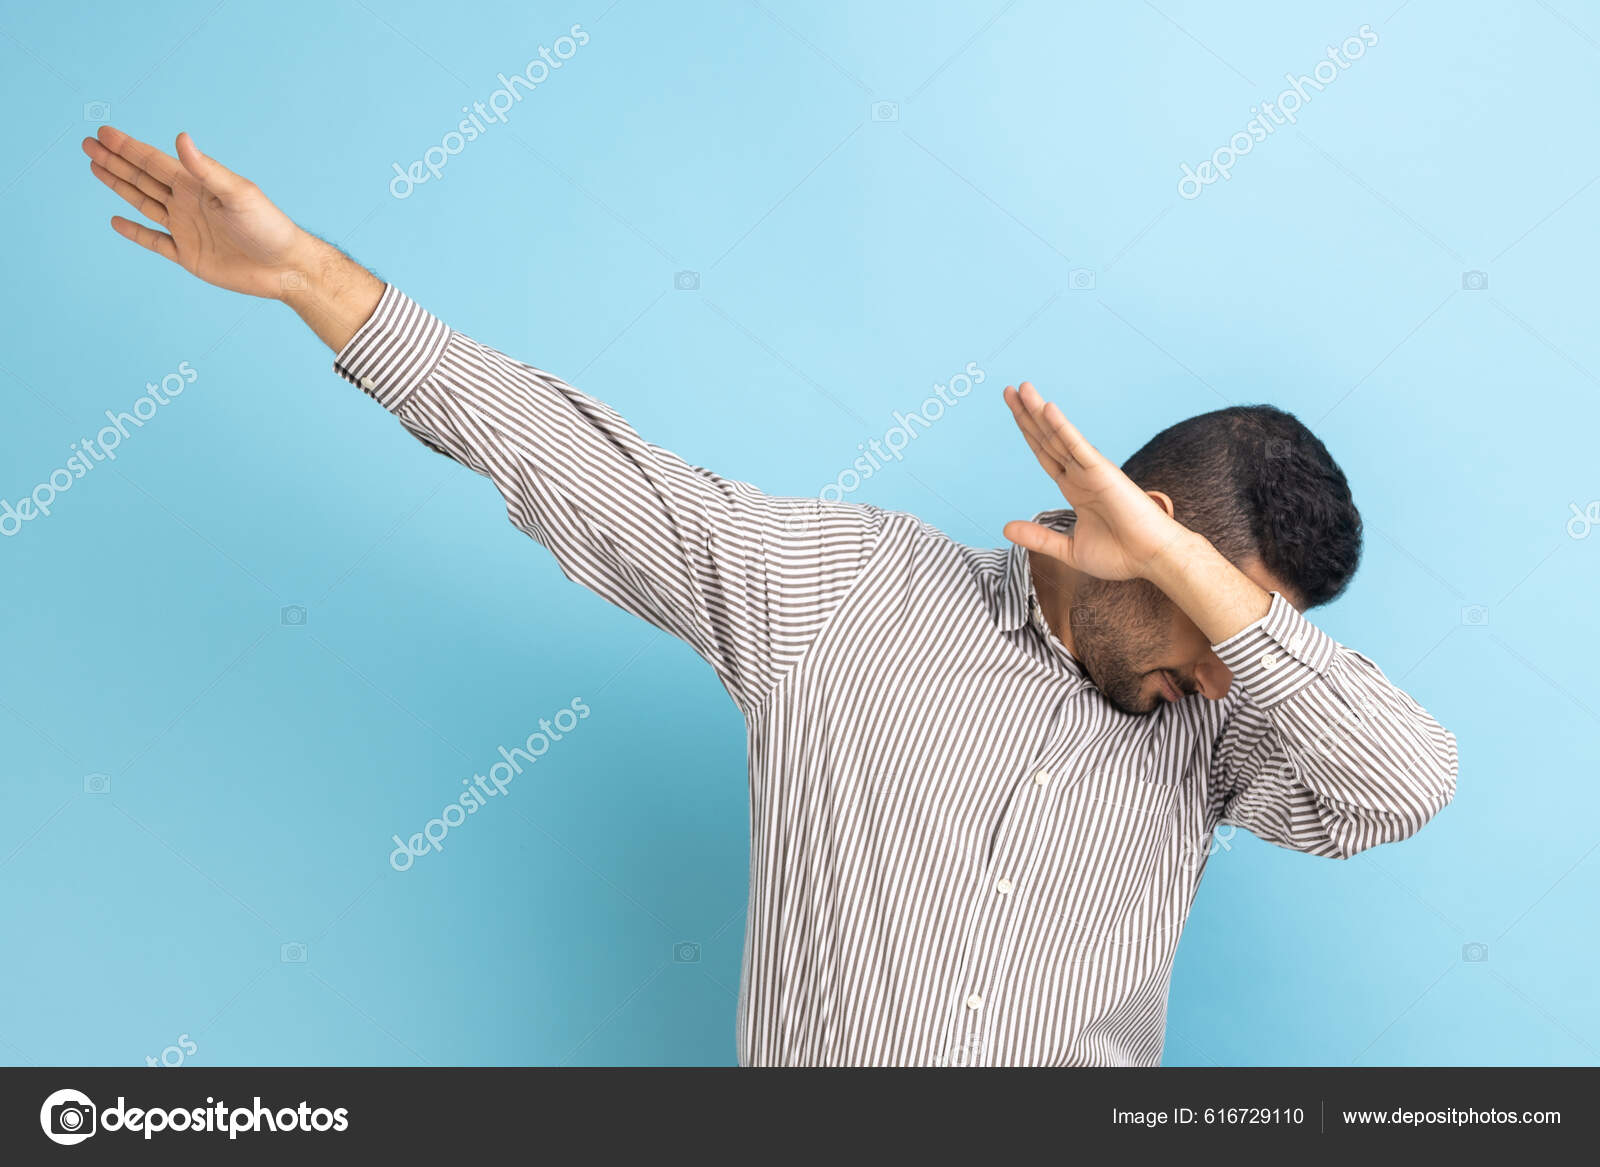 Stick Figure With Hands Up Silhouette Thin Line Icon Man In Front Pose With  Raised Hands